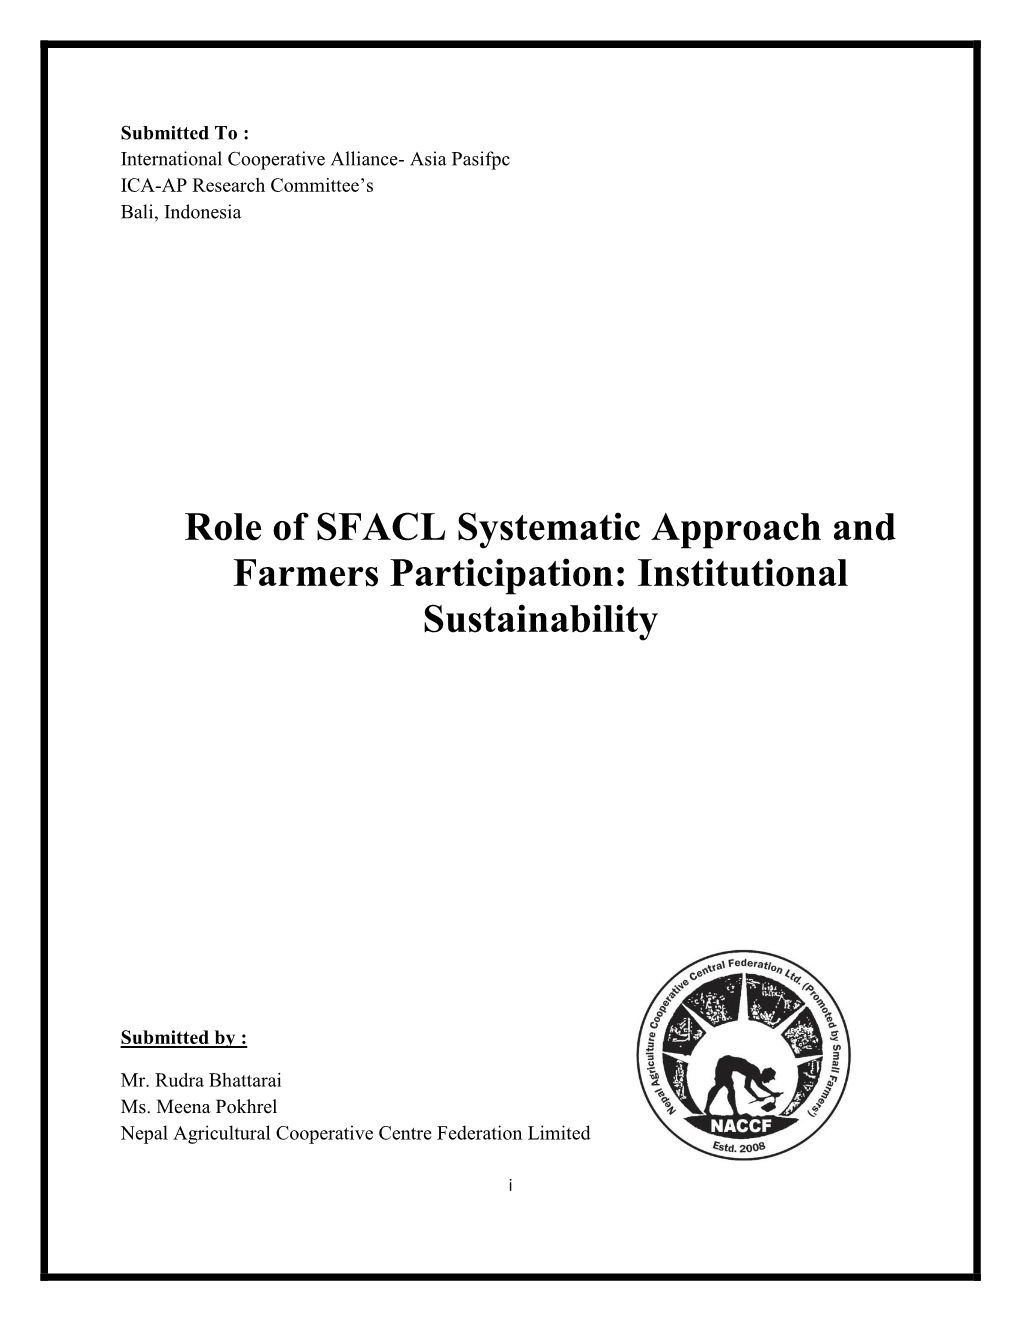 Role of SFACL Systematic Approach and Farmers Participation: Institutional Sustainability